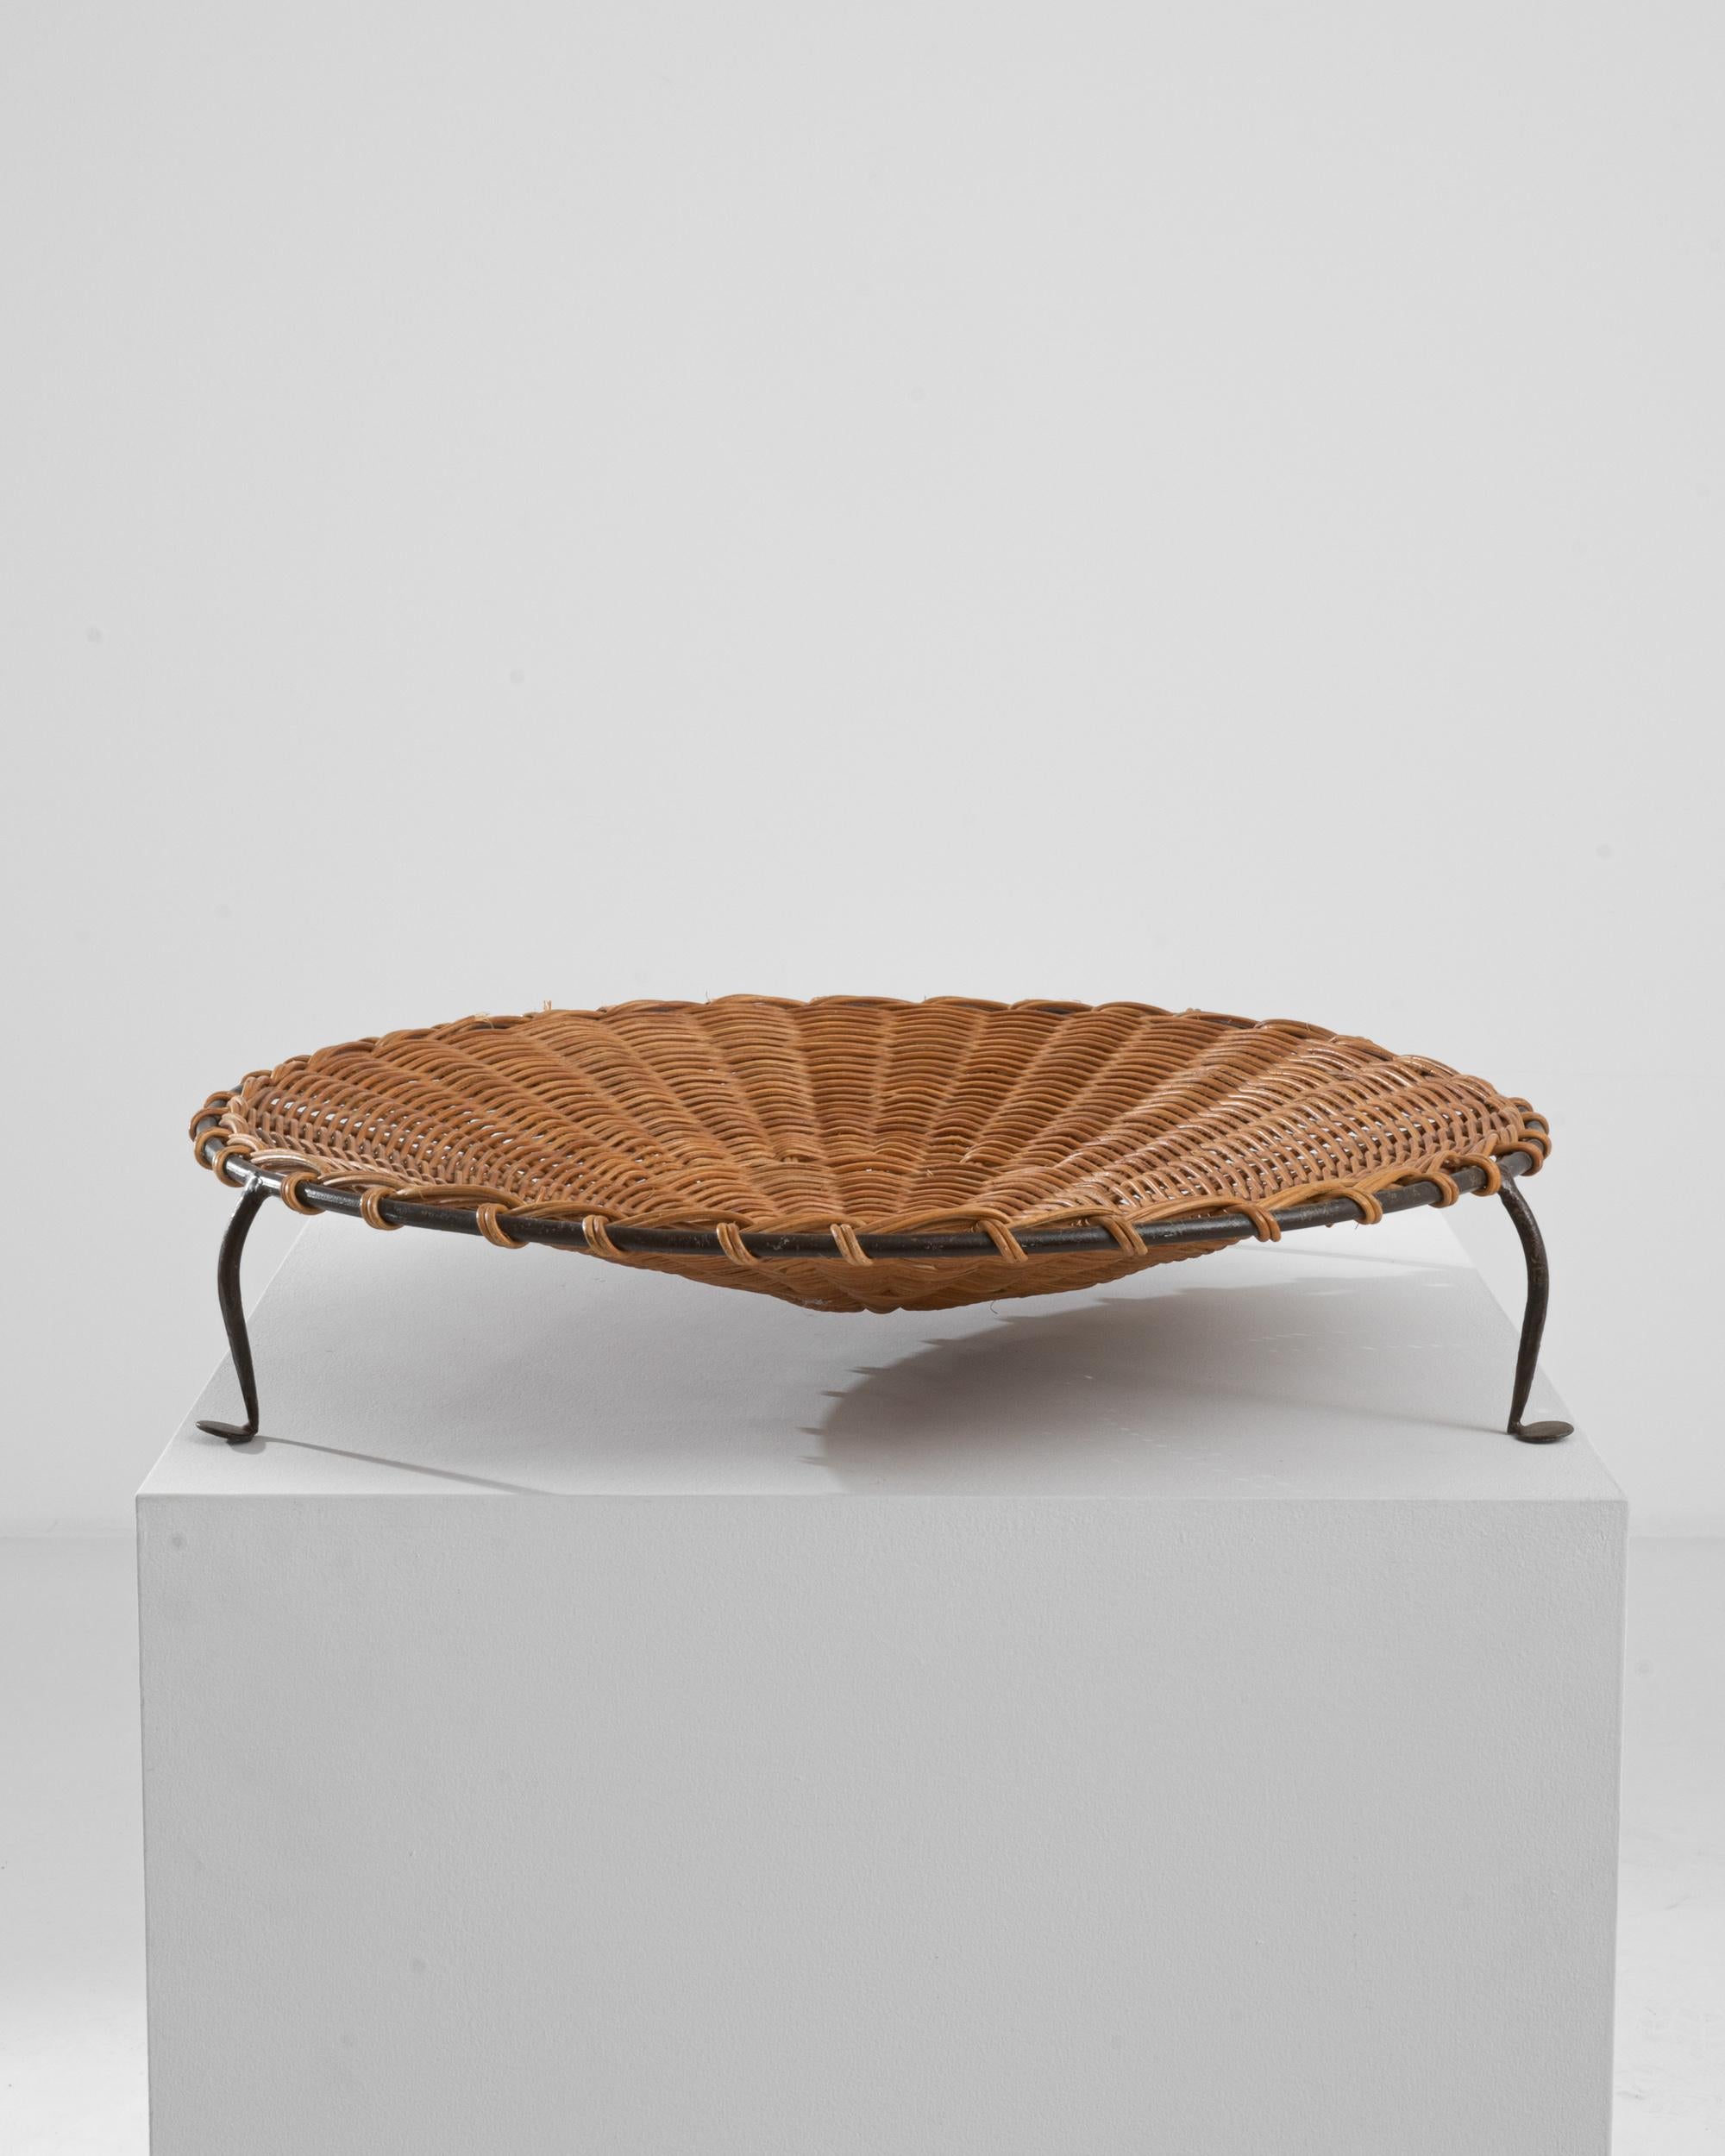 This vintage platter was made in France, circa 1960. A low bowl with an elevated base, the woven Material finds its unlikely mate in the metal structure. Radiating 60s charm, the metal feet give an anamorphic quality. Cane is woven into a concentric